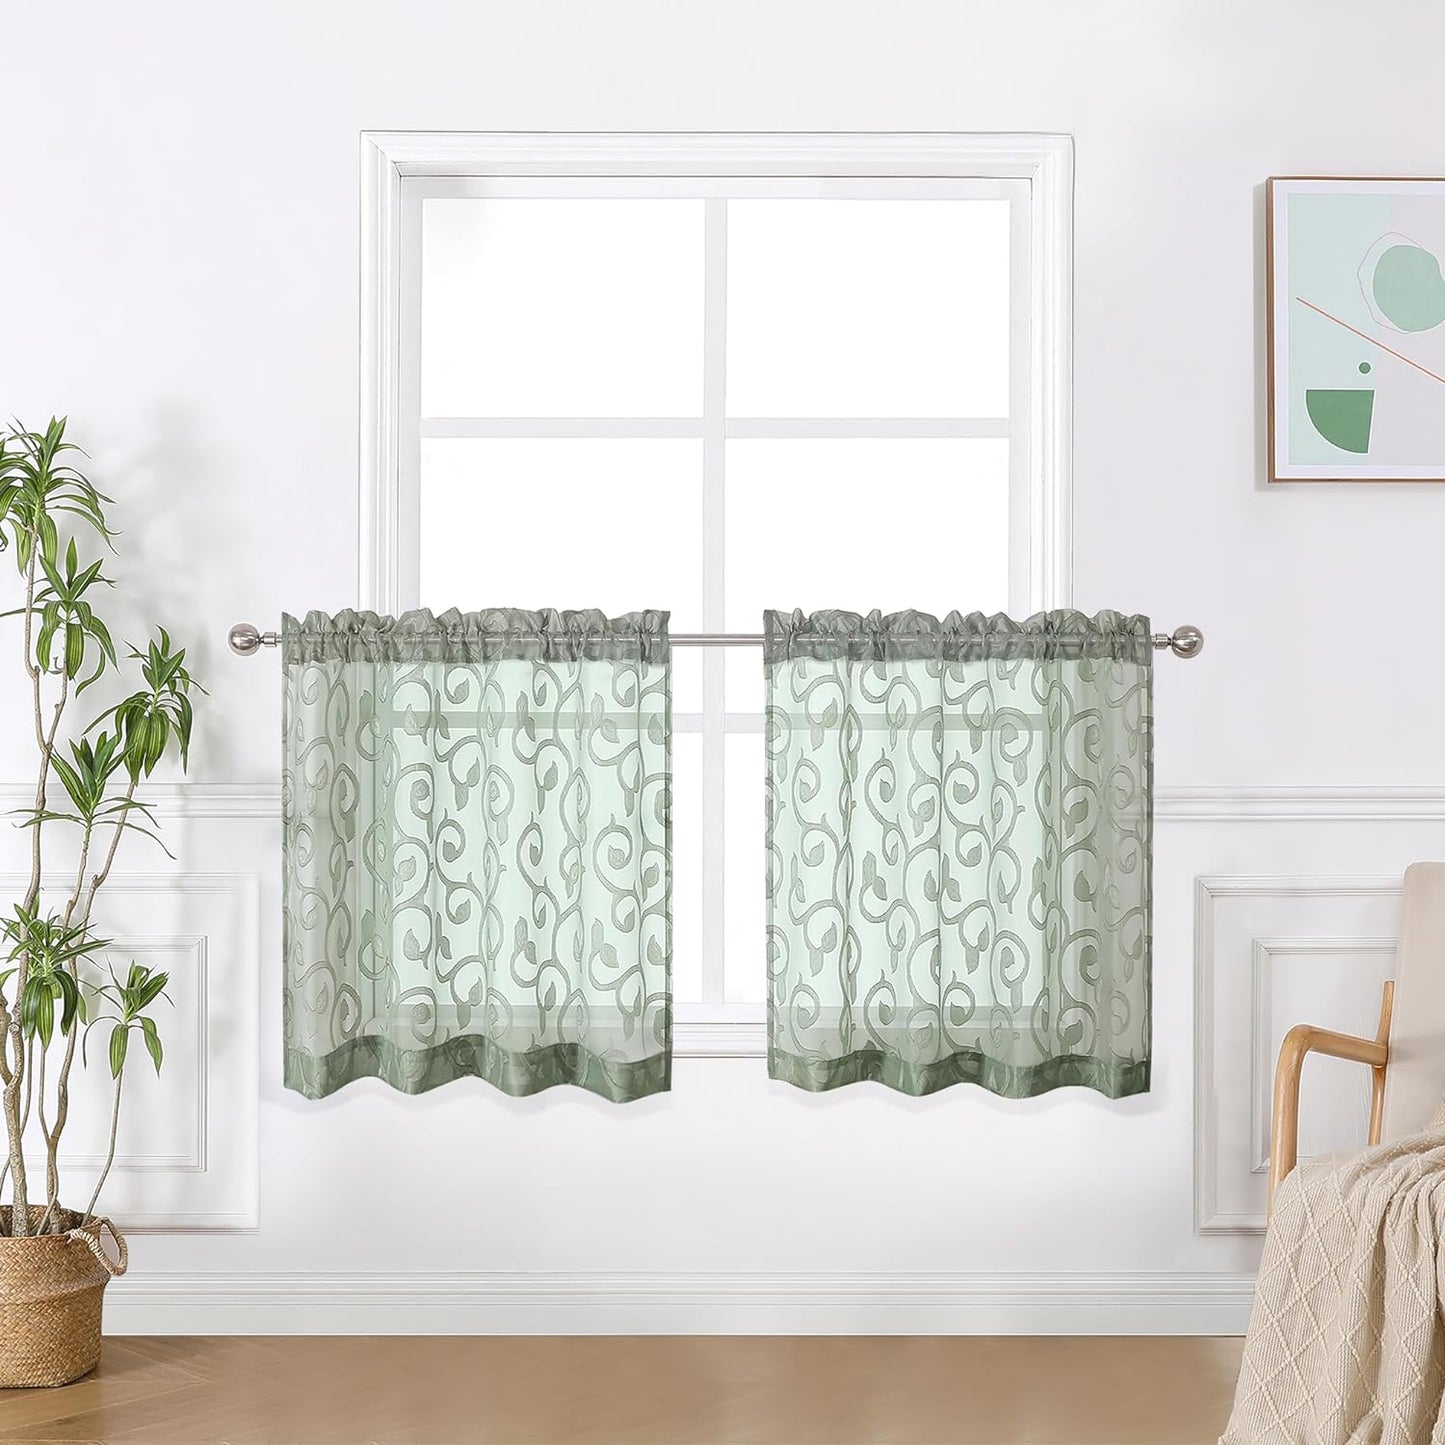 OWENIE Furman Sheer Curtains 84 Inches Long for Bedroom Living Room 2 Panels Set, Light Filtering Window Curtains, Semi Transparent Voile Top Dual Rod Pocket, Grey, 40Wx84L Inch, Total 84 Inches Width  OWENIE Sage Green 26W X 24L 